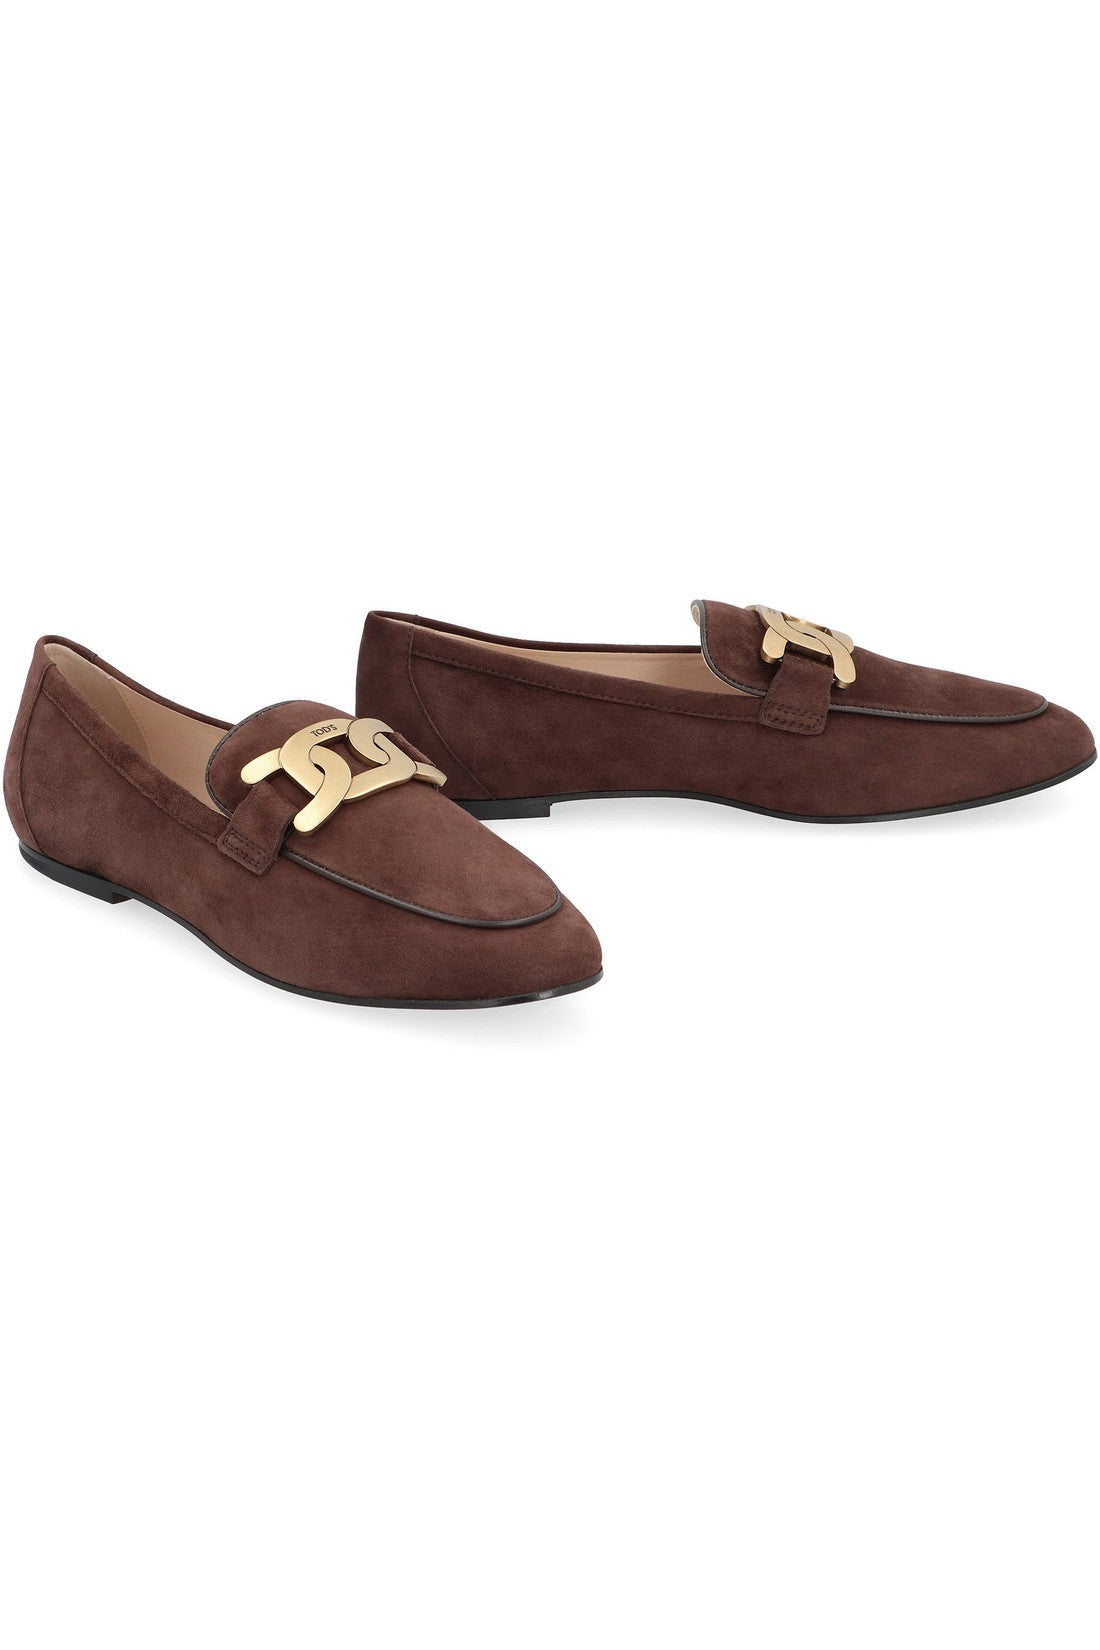 Tod's-OUTLET-SALE-Kate Suede loafers-ARCHIVIST